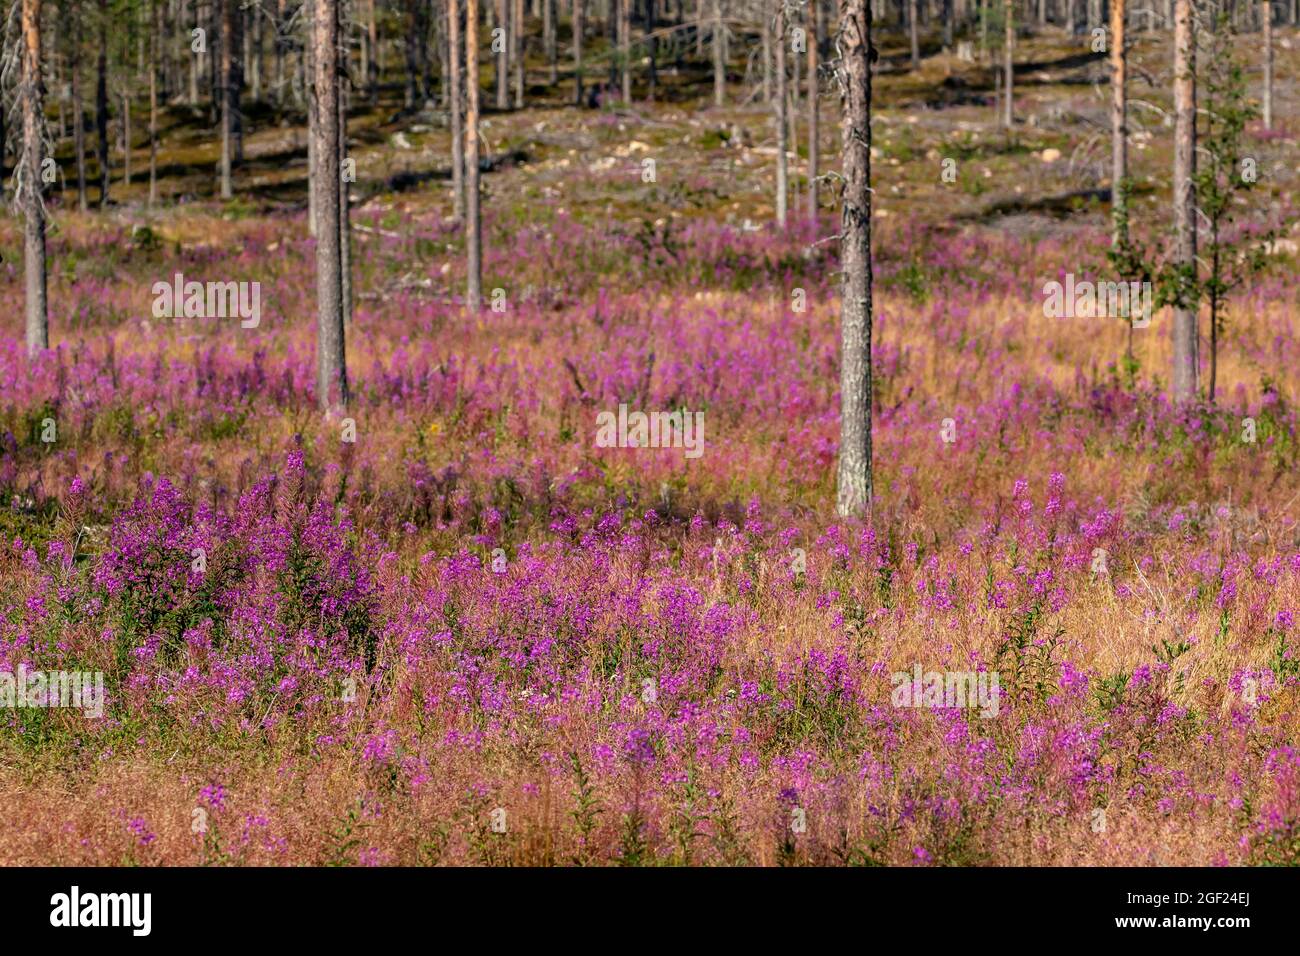 Flowering fireweed, Chamerion angustifolium colors the forest floor purple during summer in Finnish nature, Northern Europe Stock Photo